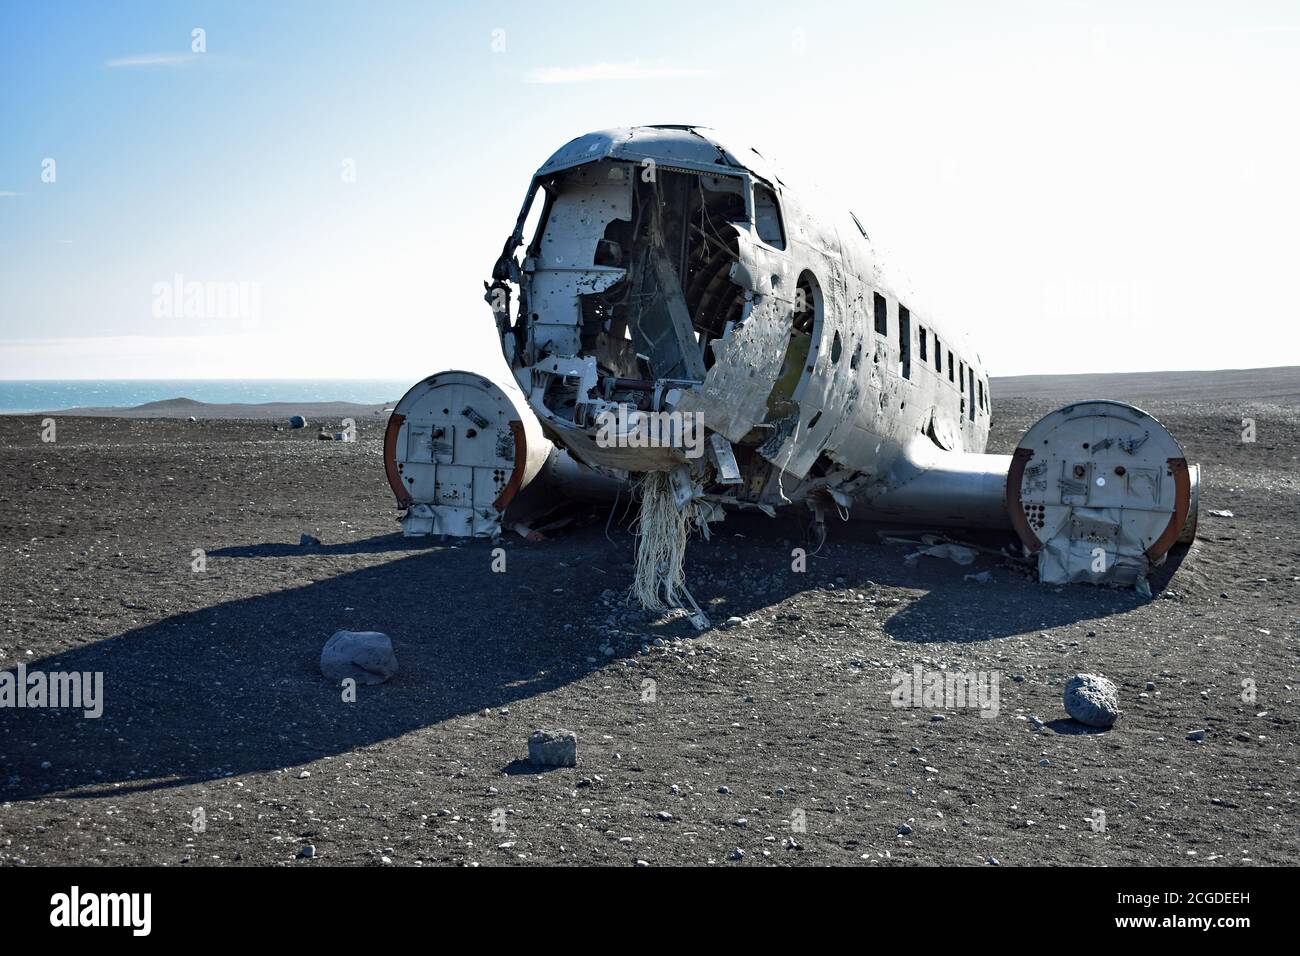 Looking at the front of the Solheimasandur Plane Wreck on the black sand.  The two engines are still in place.  A bright sunny day.  Iceland. Stock Photo